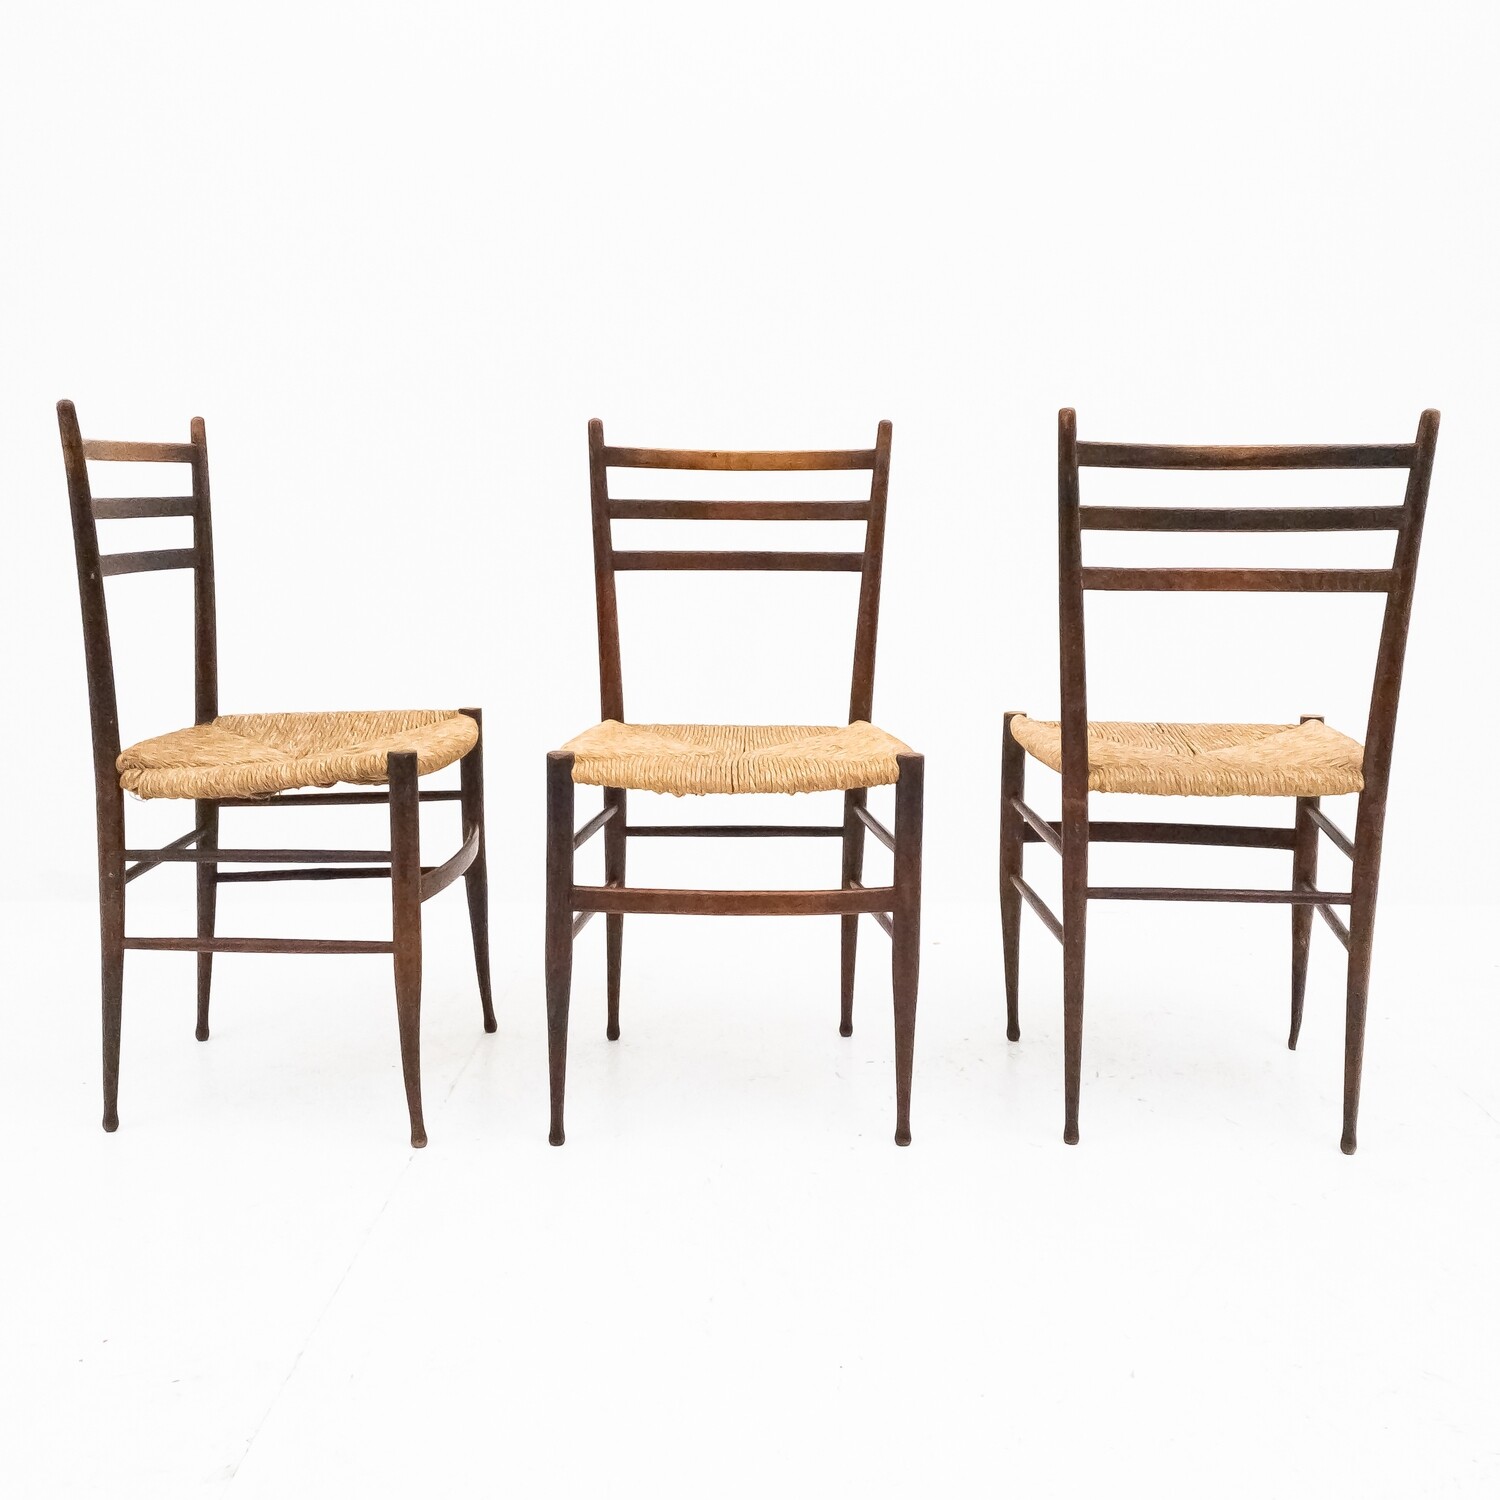 Set of 3 wooden chairs, Italy 1950s